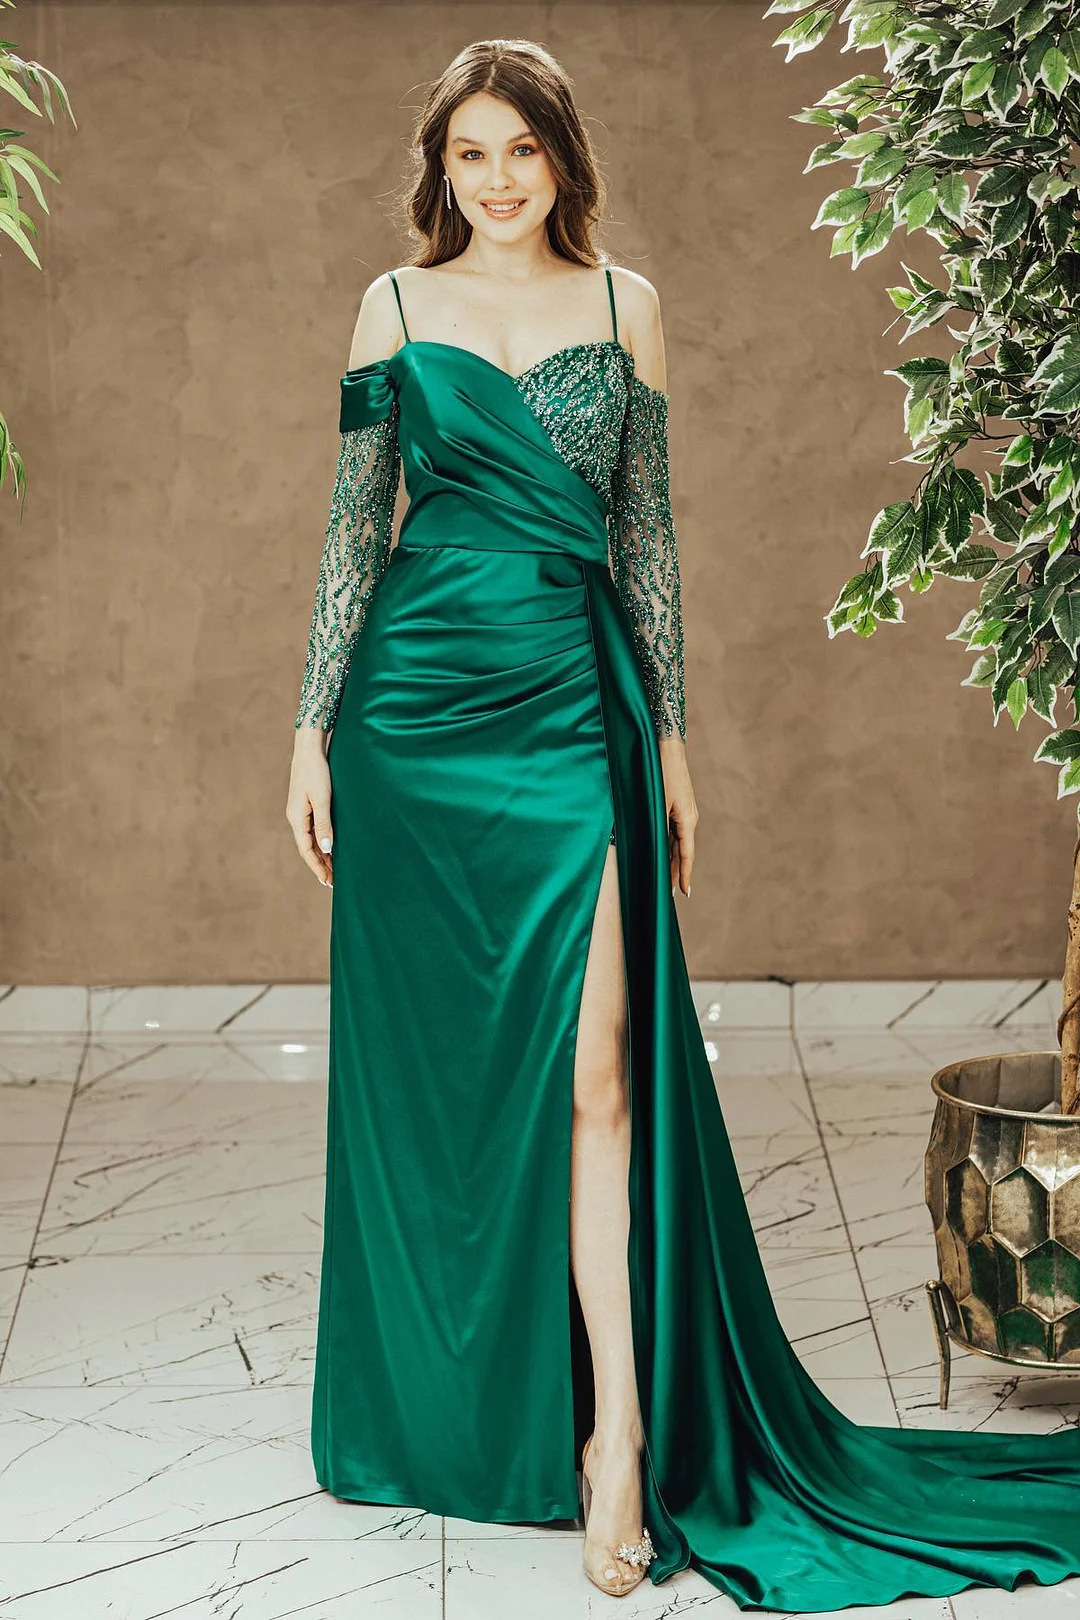 Daisda Emerald Spaghetti-Strap Off-The-Shoulder Sequins Prom Dress With Slit Pleated